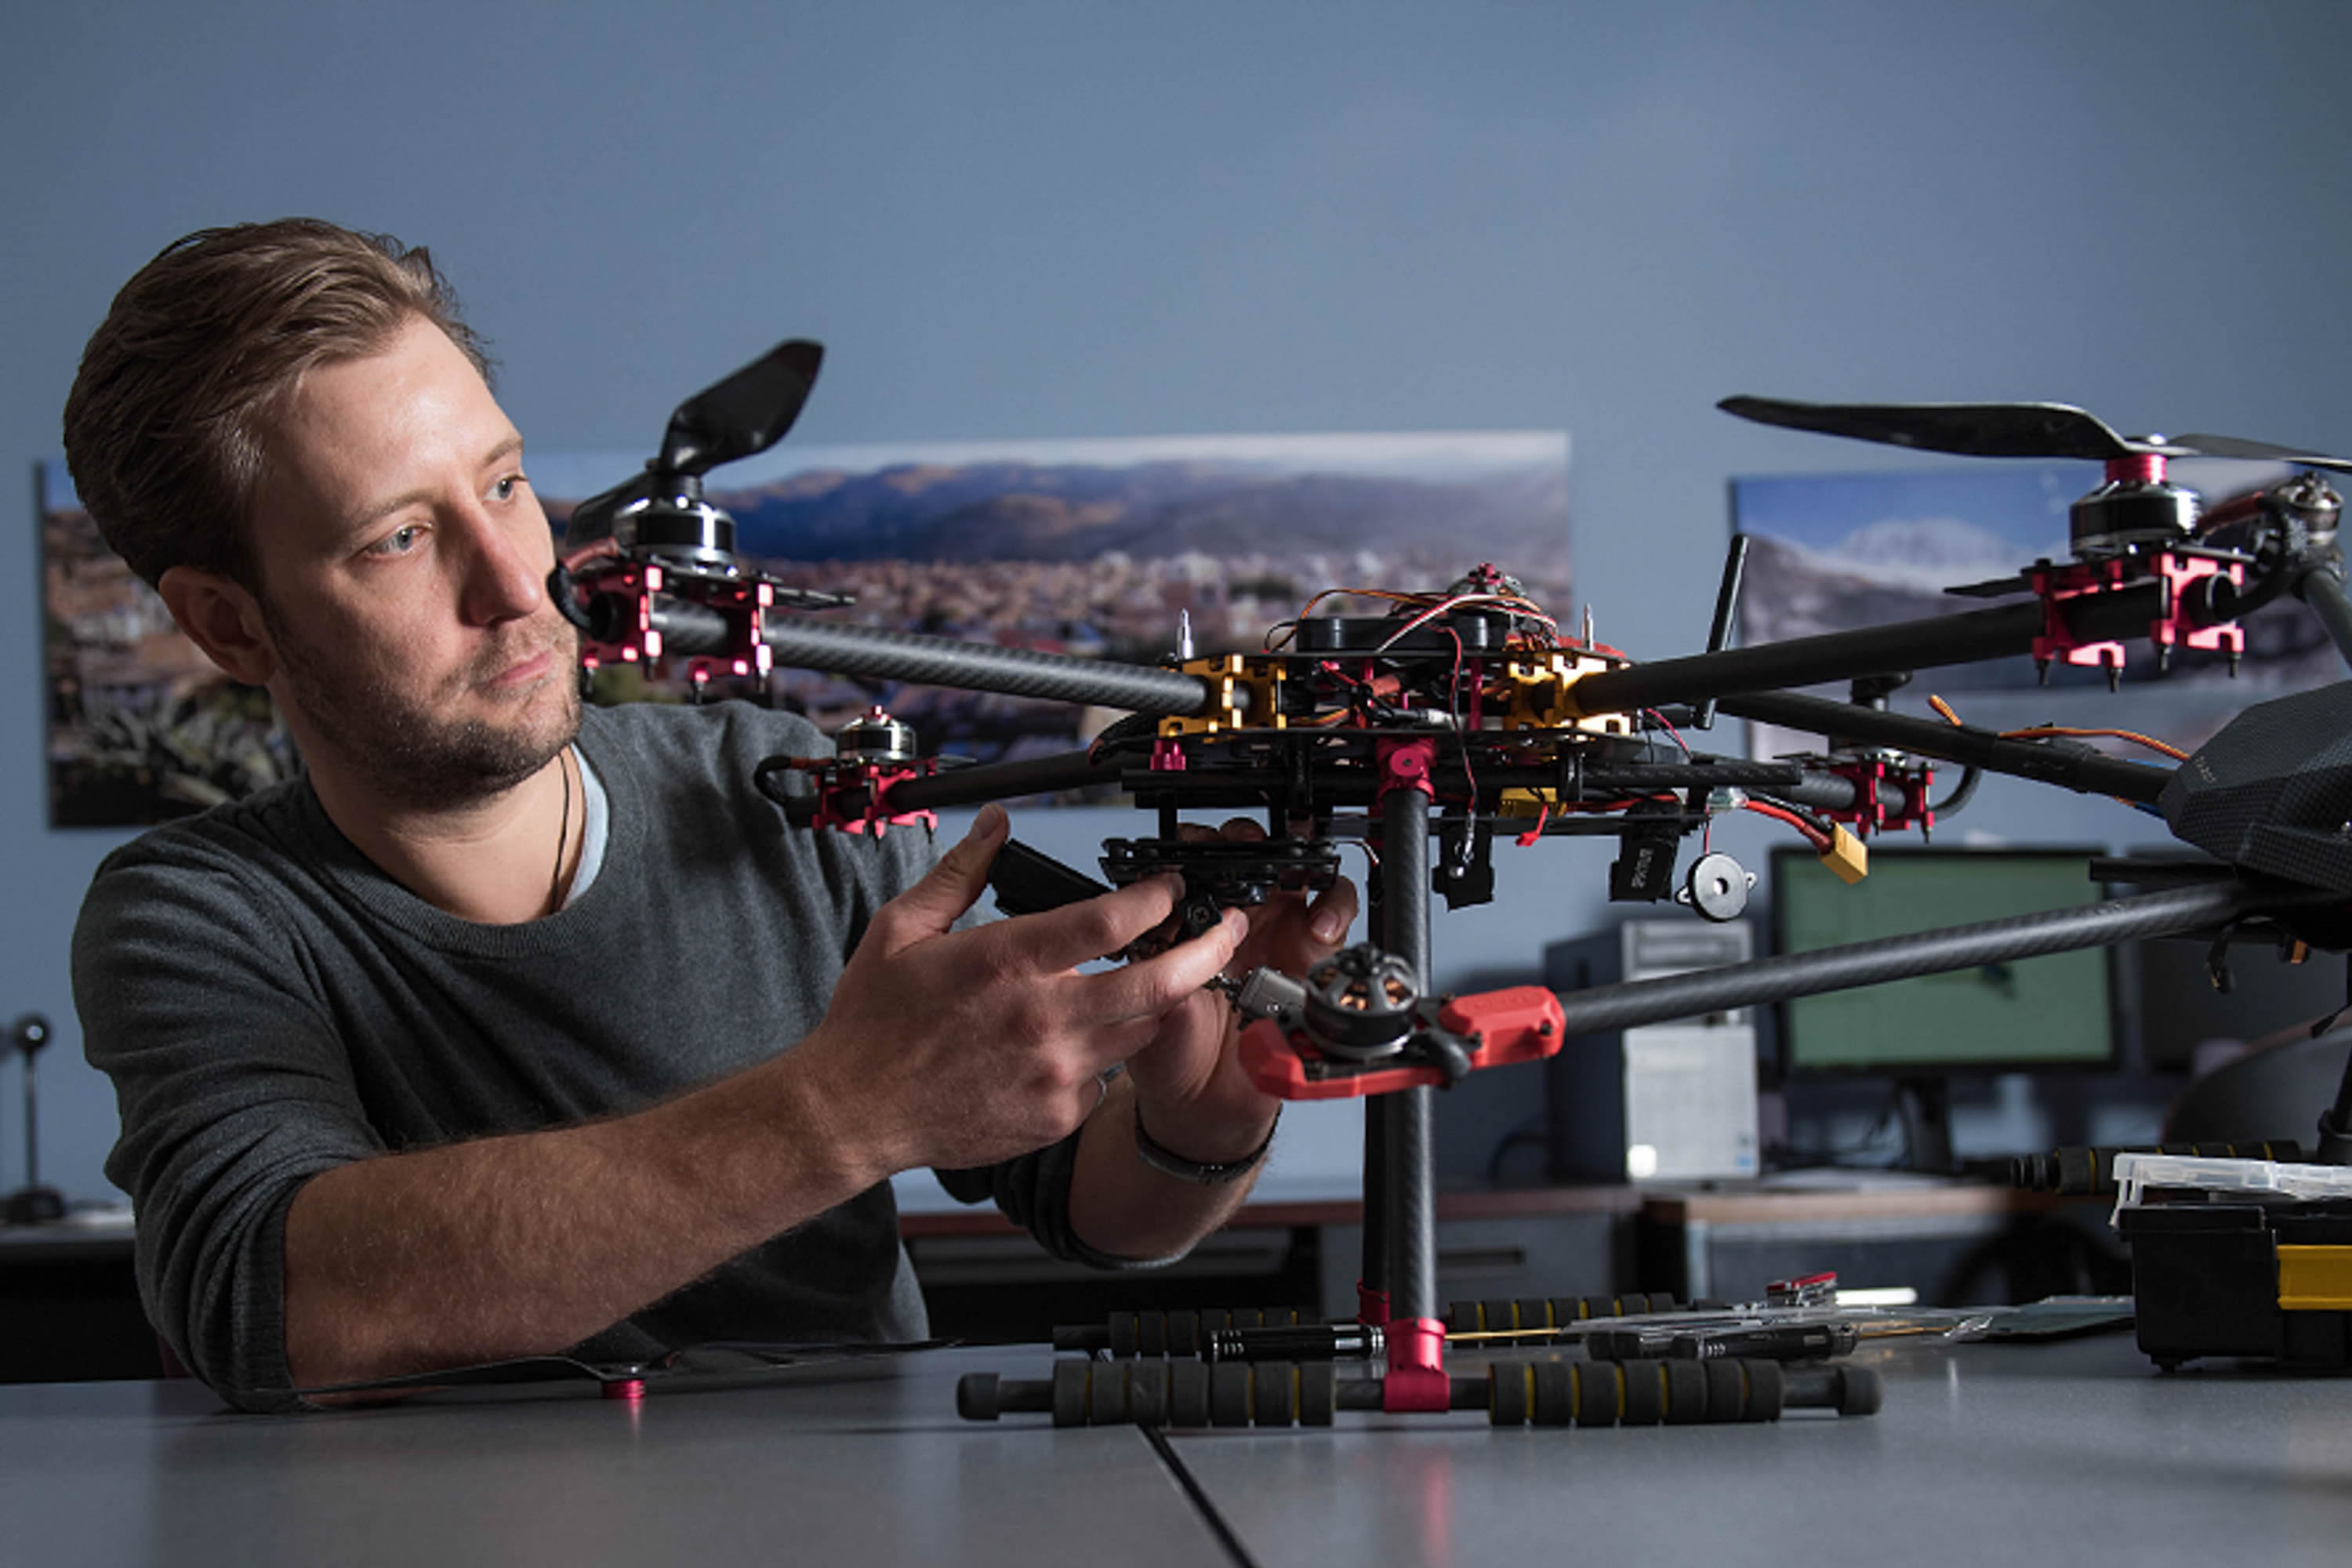 Graduate student with drone